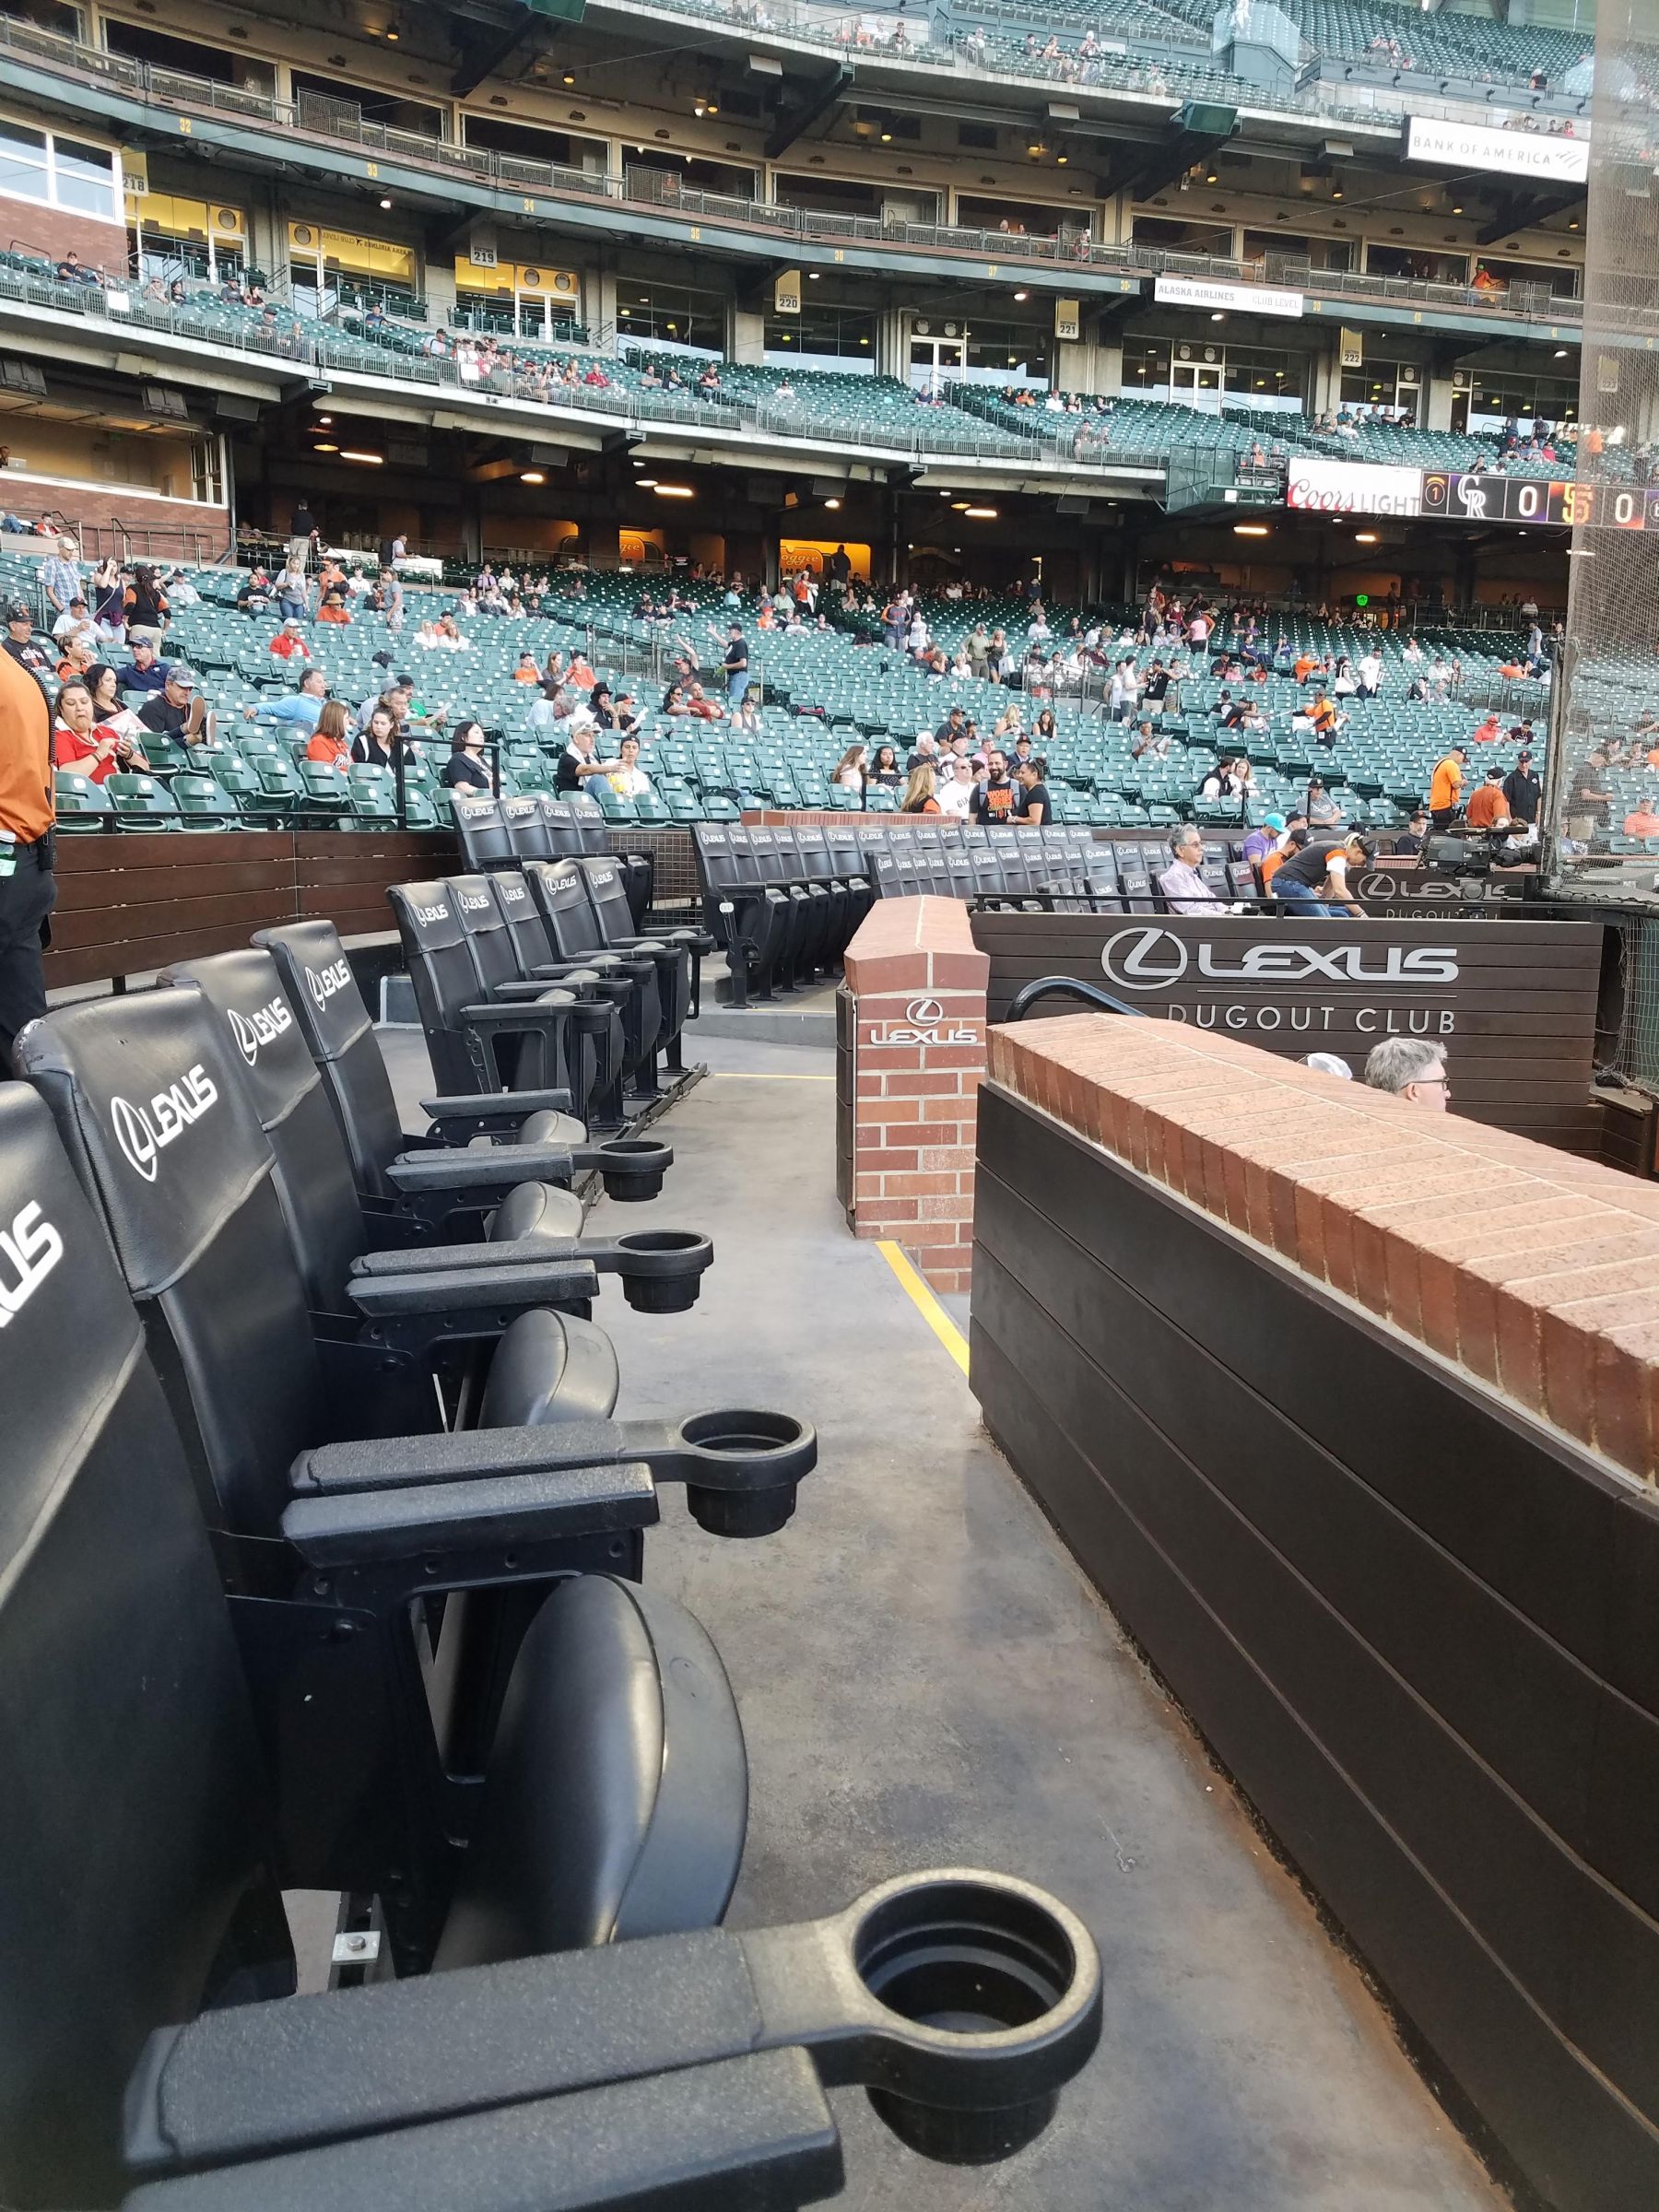 seat number sf giants seating chart